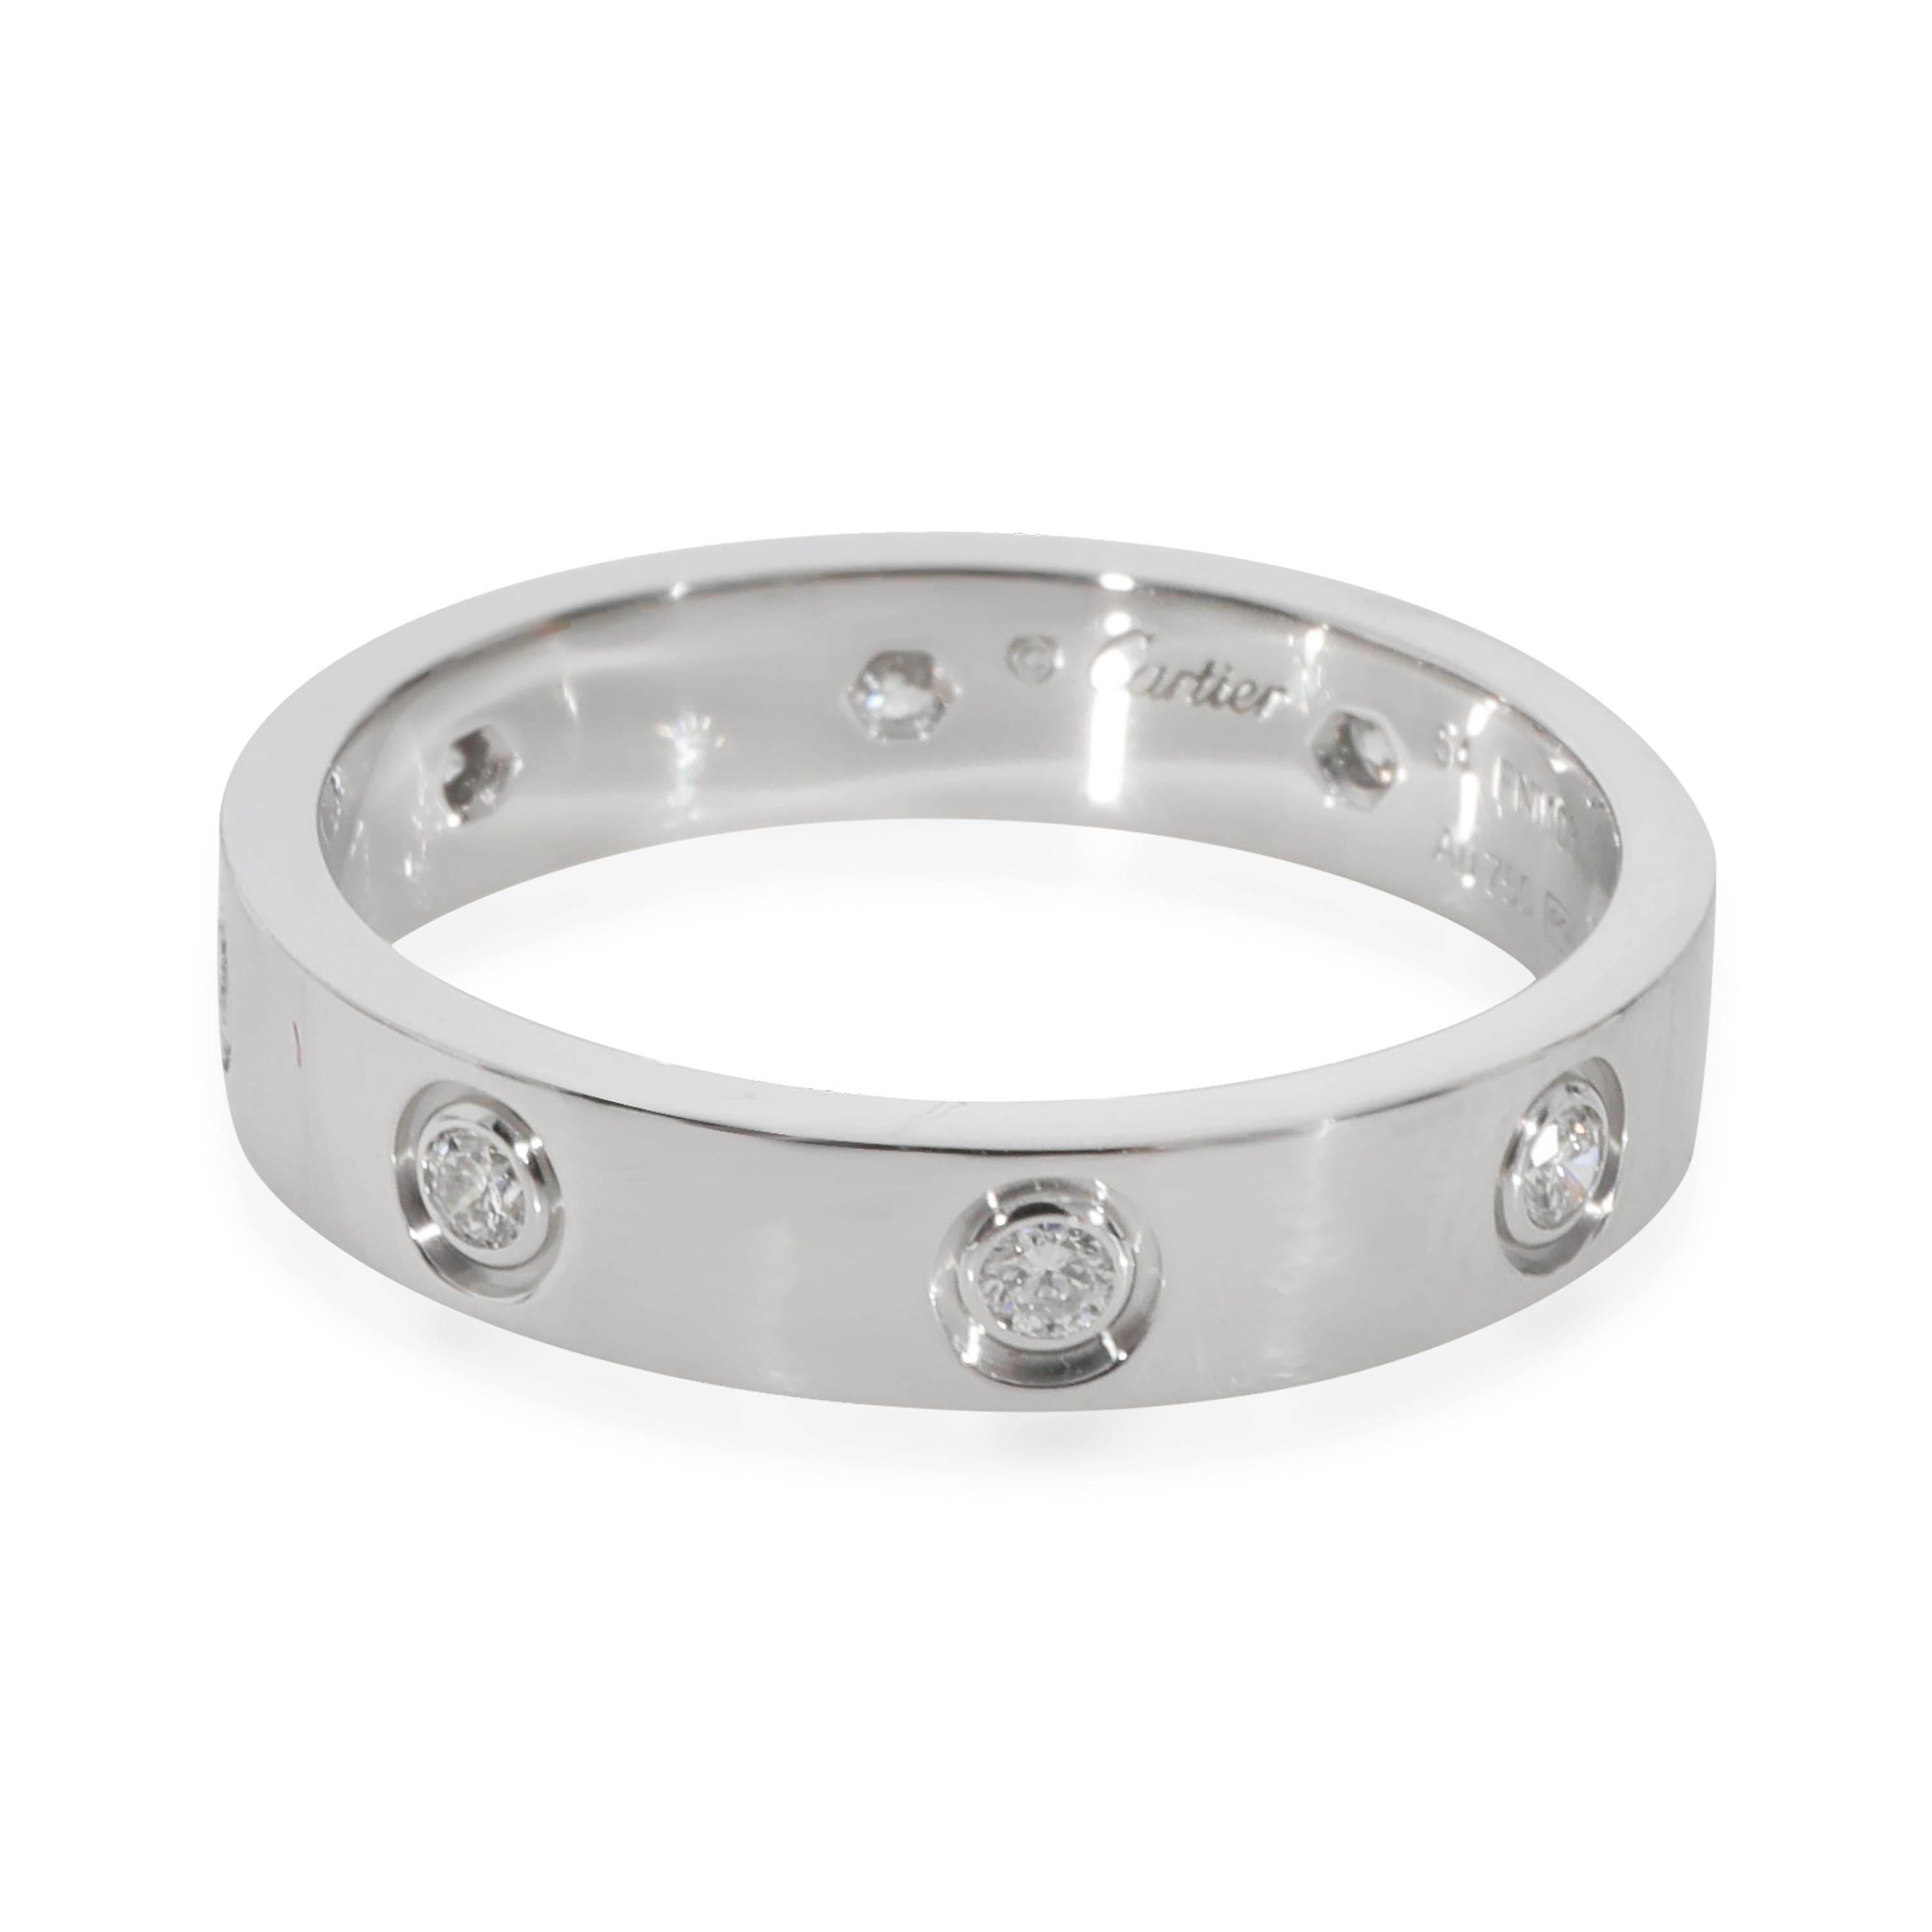 Cartier Love Diamond Band in 18k White Gold 0.19 CTW

PRIMARY DETAILS
SKU: 127873
Listing Title: Cartier Love Diamond Band in 18k White Gold 0.19 CTW
Condition Description: Cartier's Love collection is the epitome of iconic, from the recognizable